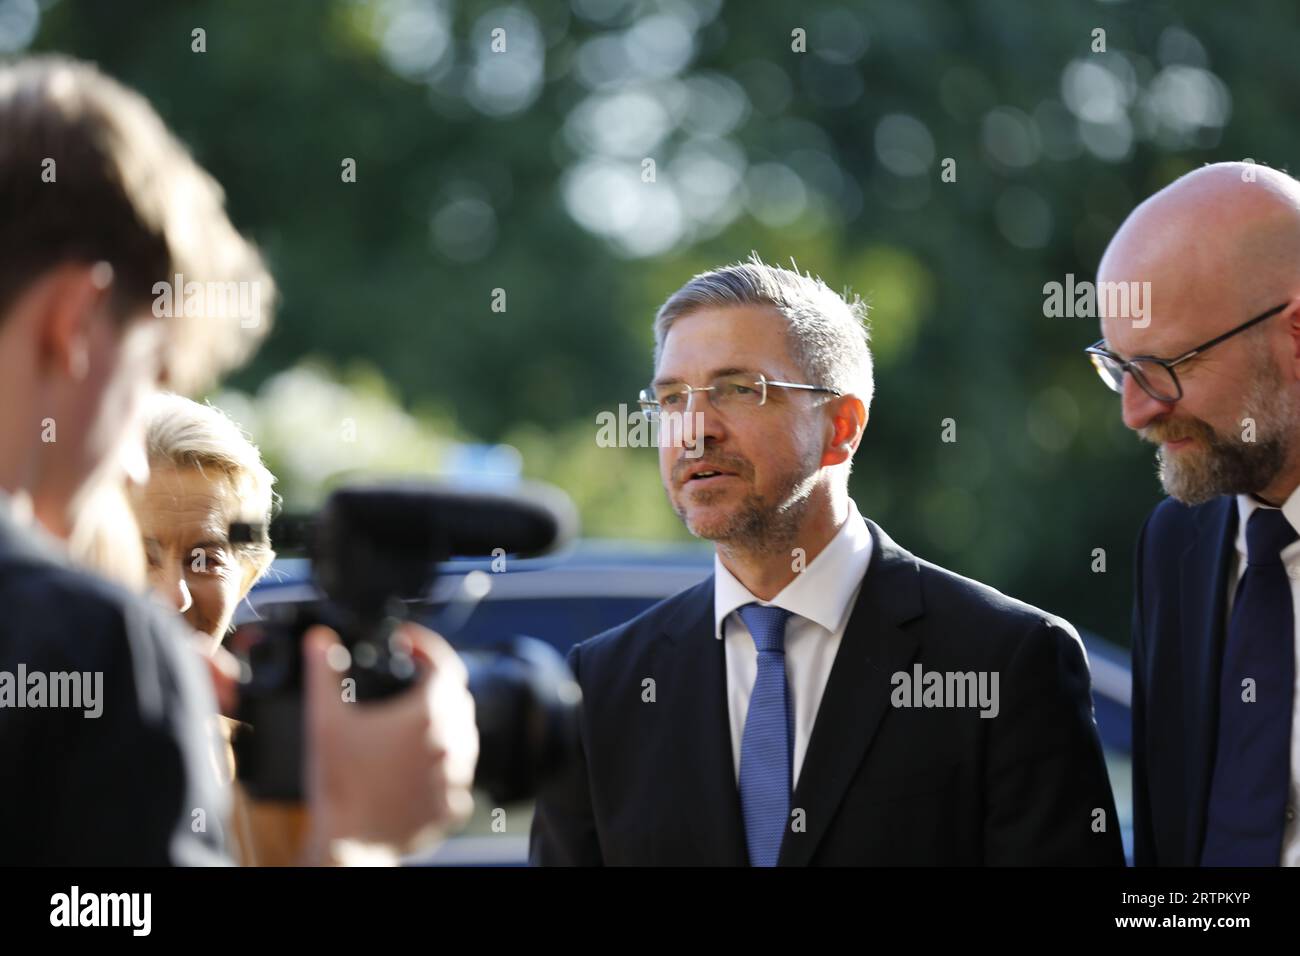 Potsdam, Germany, September 14, 2023, (l-r) , Mike Schubert attends the M100 Media Award to the Iranian “Women, Life, Freedom” movement in the Orangerie in Park Sanssouci. Sven Struck/Alamy Live News Stock Photo